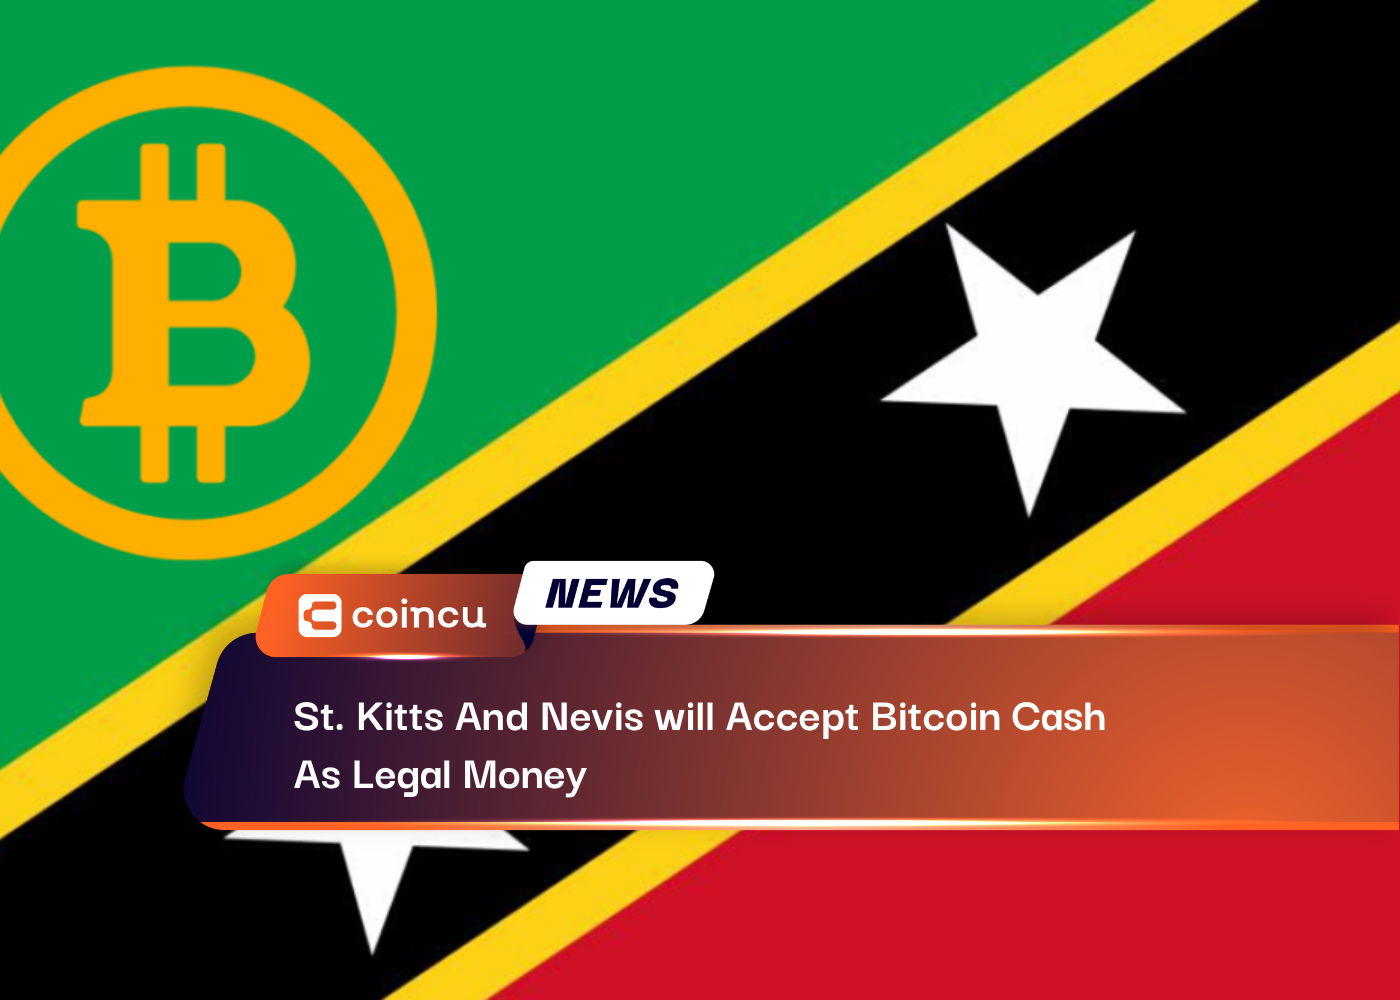 St. Kitts And Nevis will Accept Bitcoin Cash